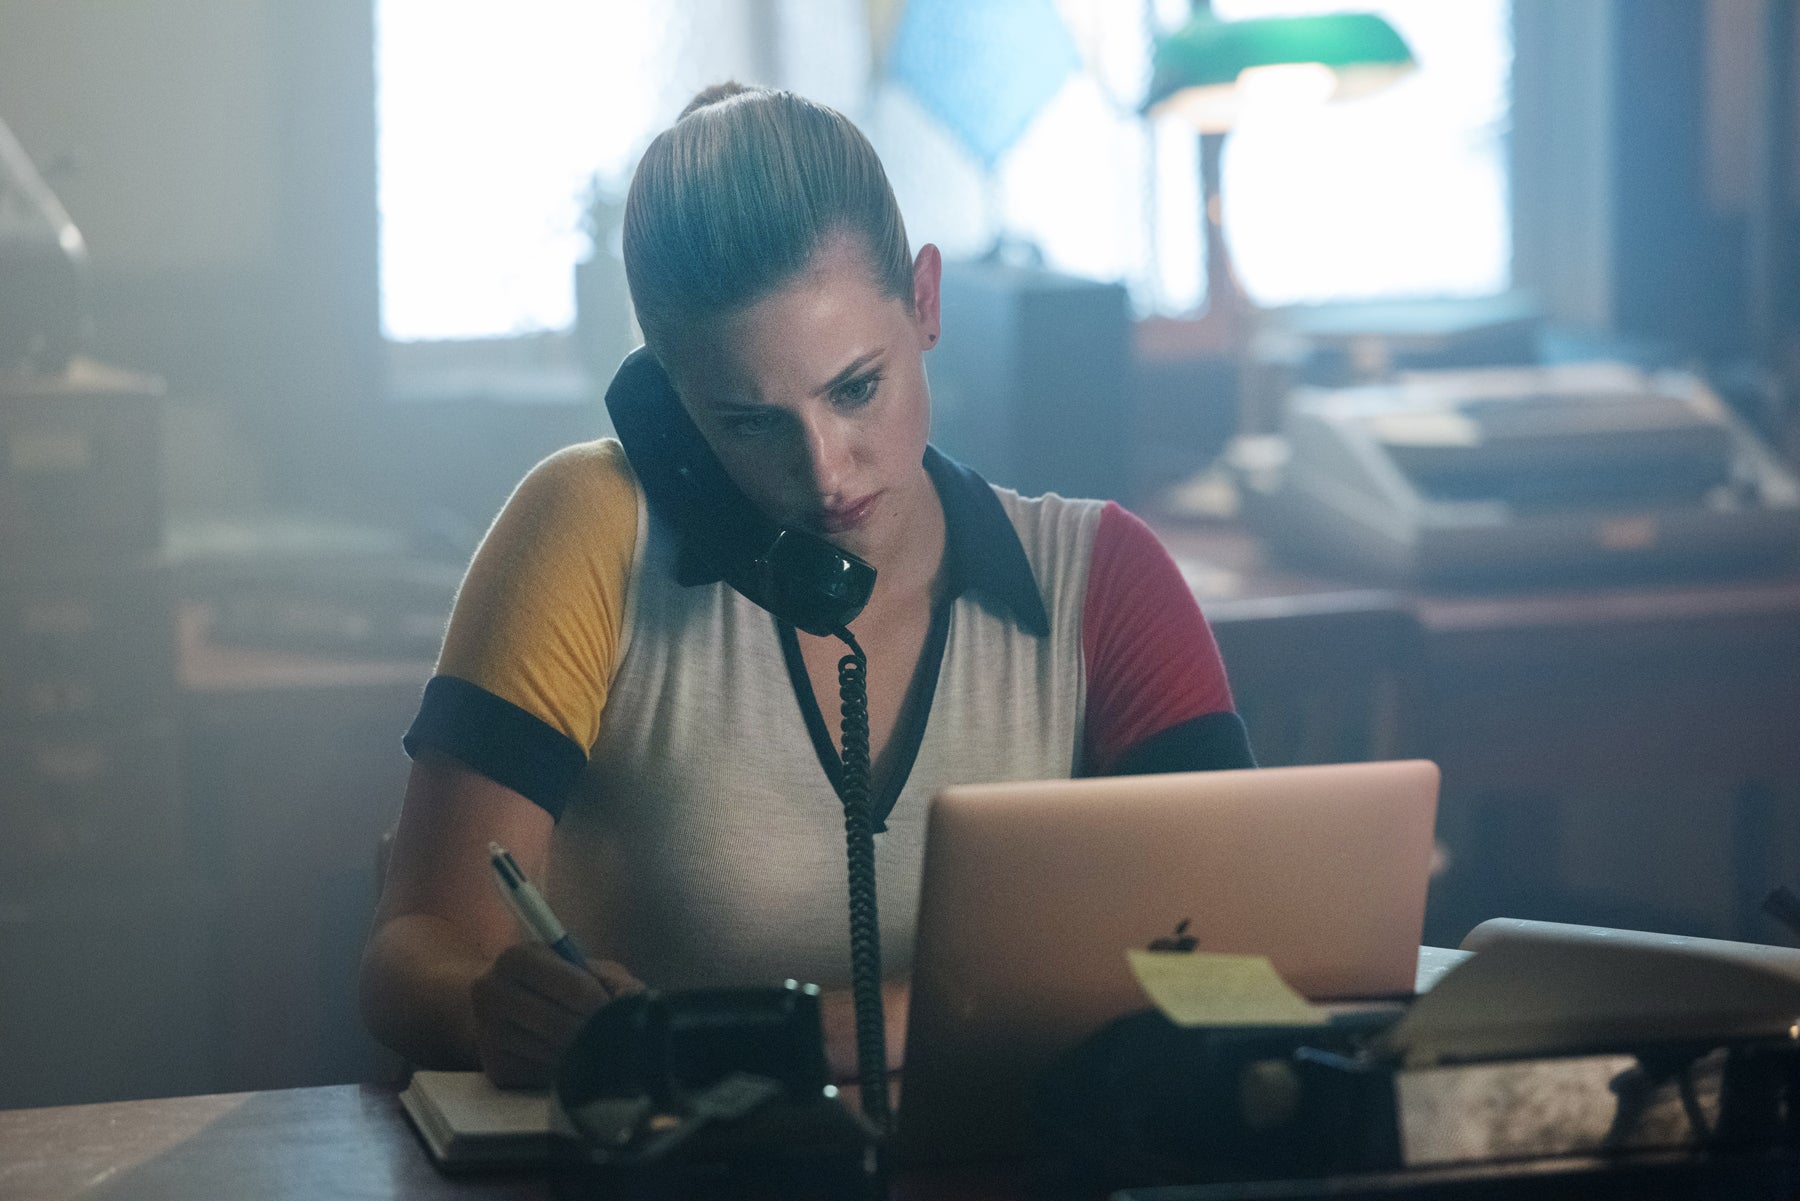 Betty Cooper talks on a phone and sits at a desk in front of a computer.